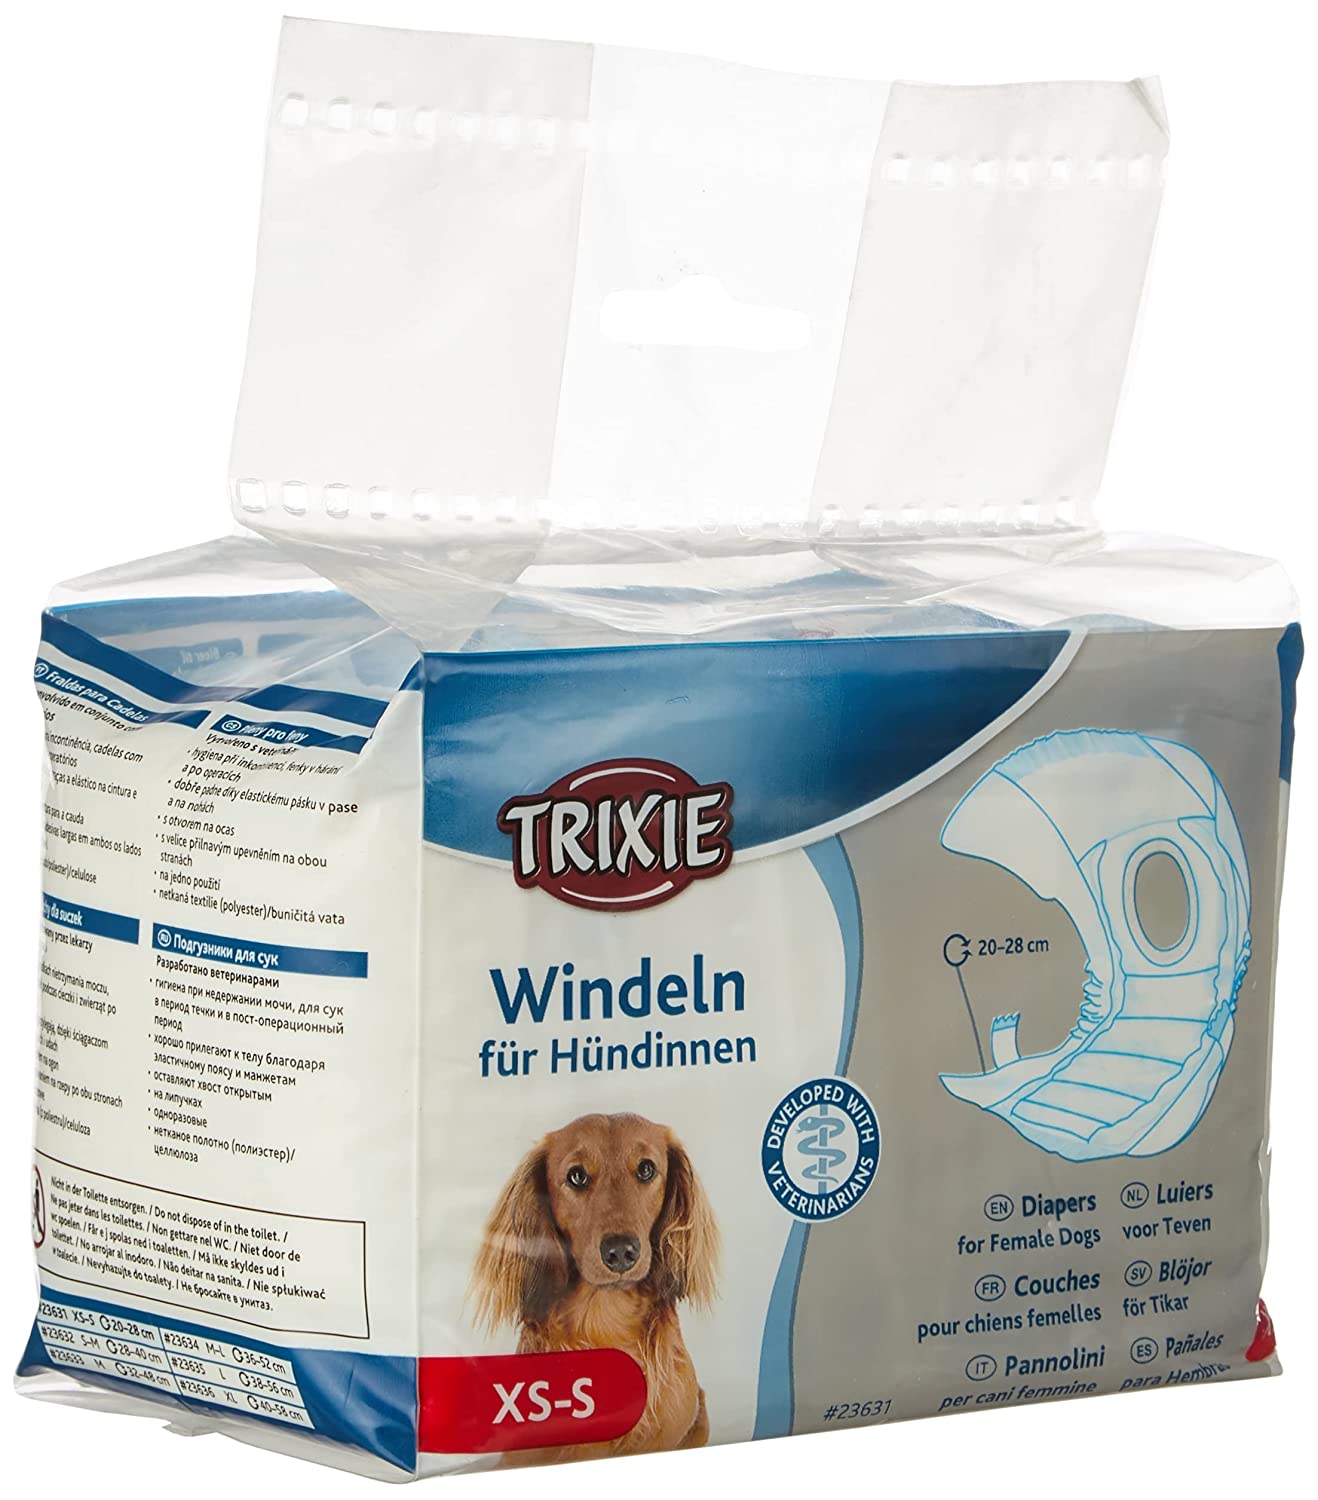 Trixie Diapers for Female Dogs, 12 pcs